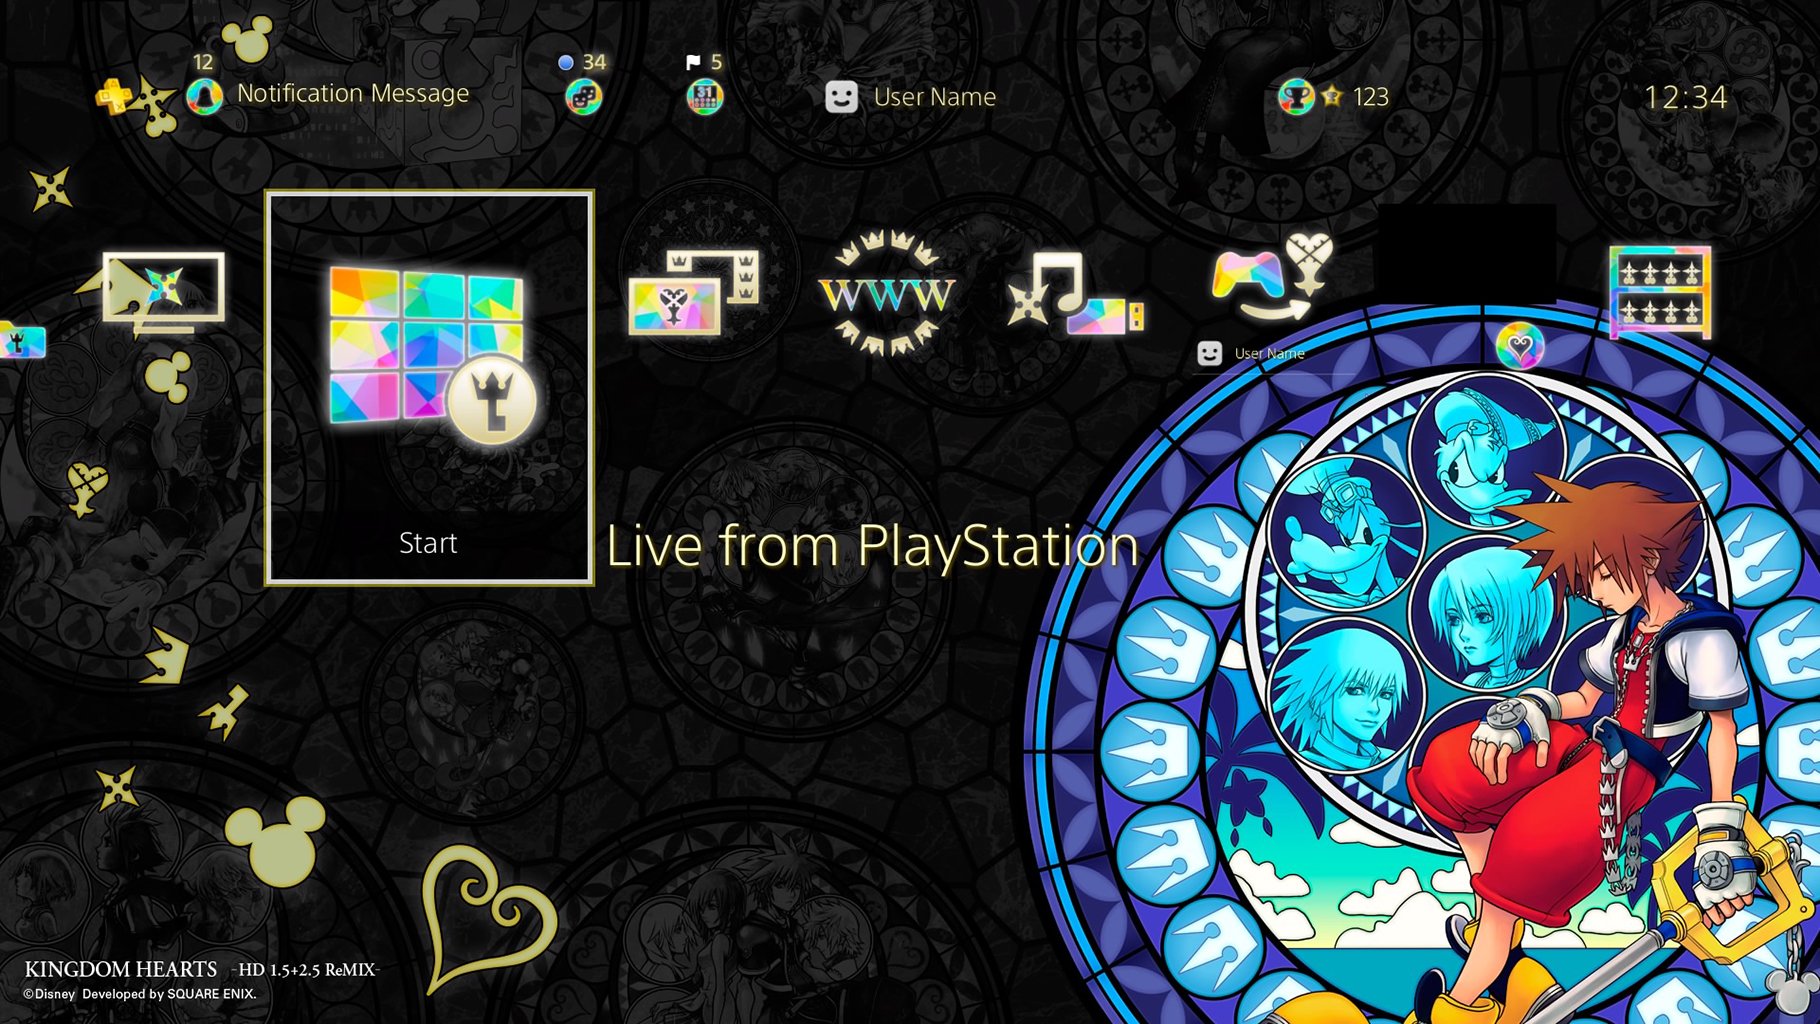 Kingdom Hearts HD + 2.5 Remix digital pre-orders include stained glass PS4 theme - Gematsu